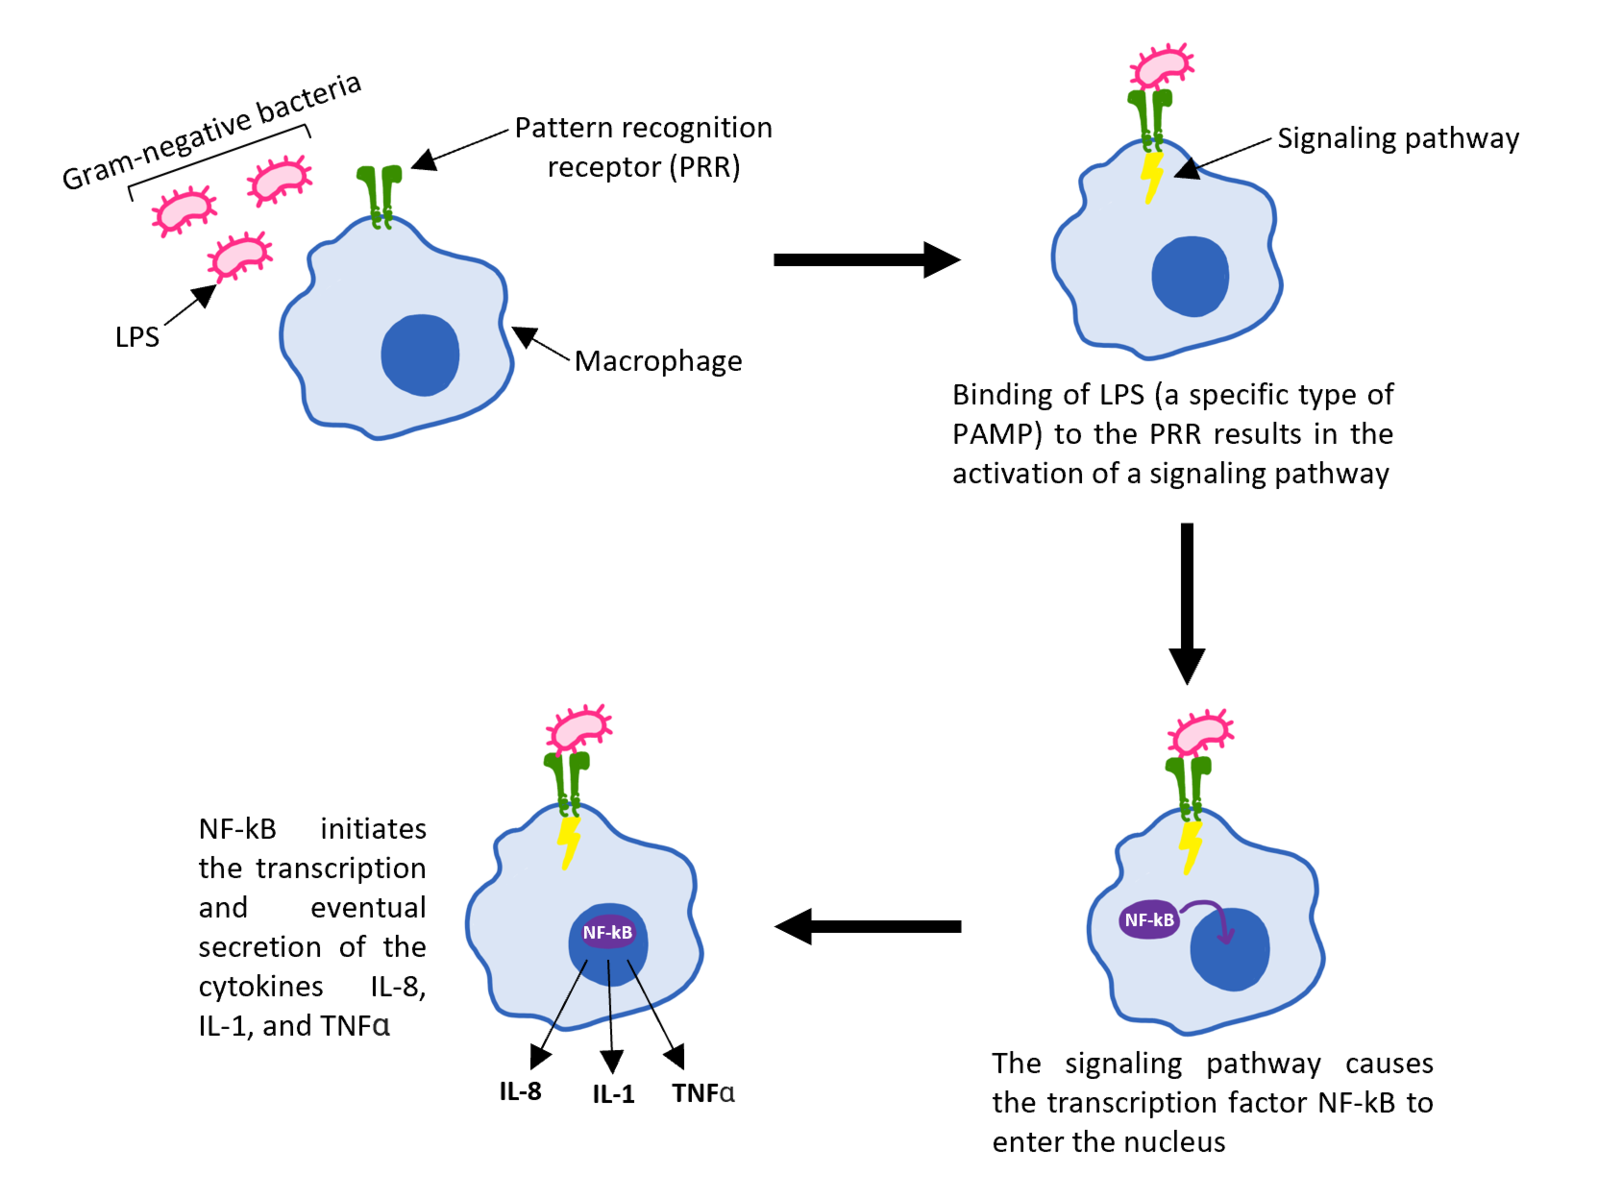 https://wikiedu.org/wp-content/uploads/2020/04/1598px-PAMPs_and_PRRs_in_the_Innate_Immune_System.png